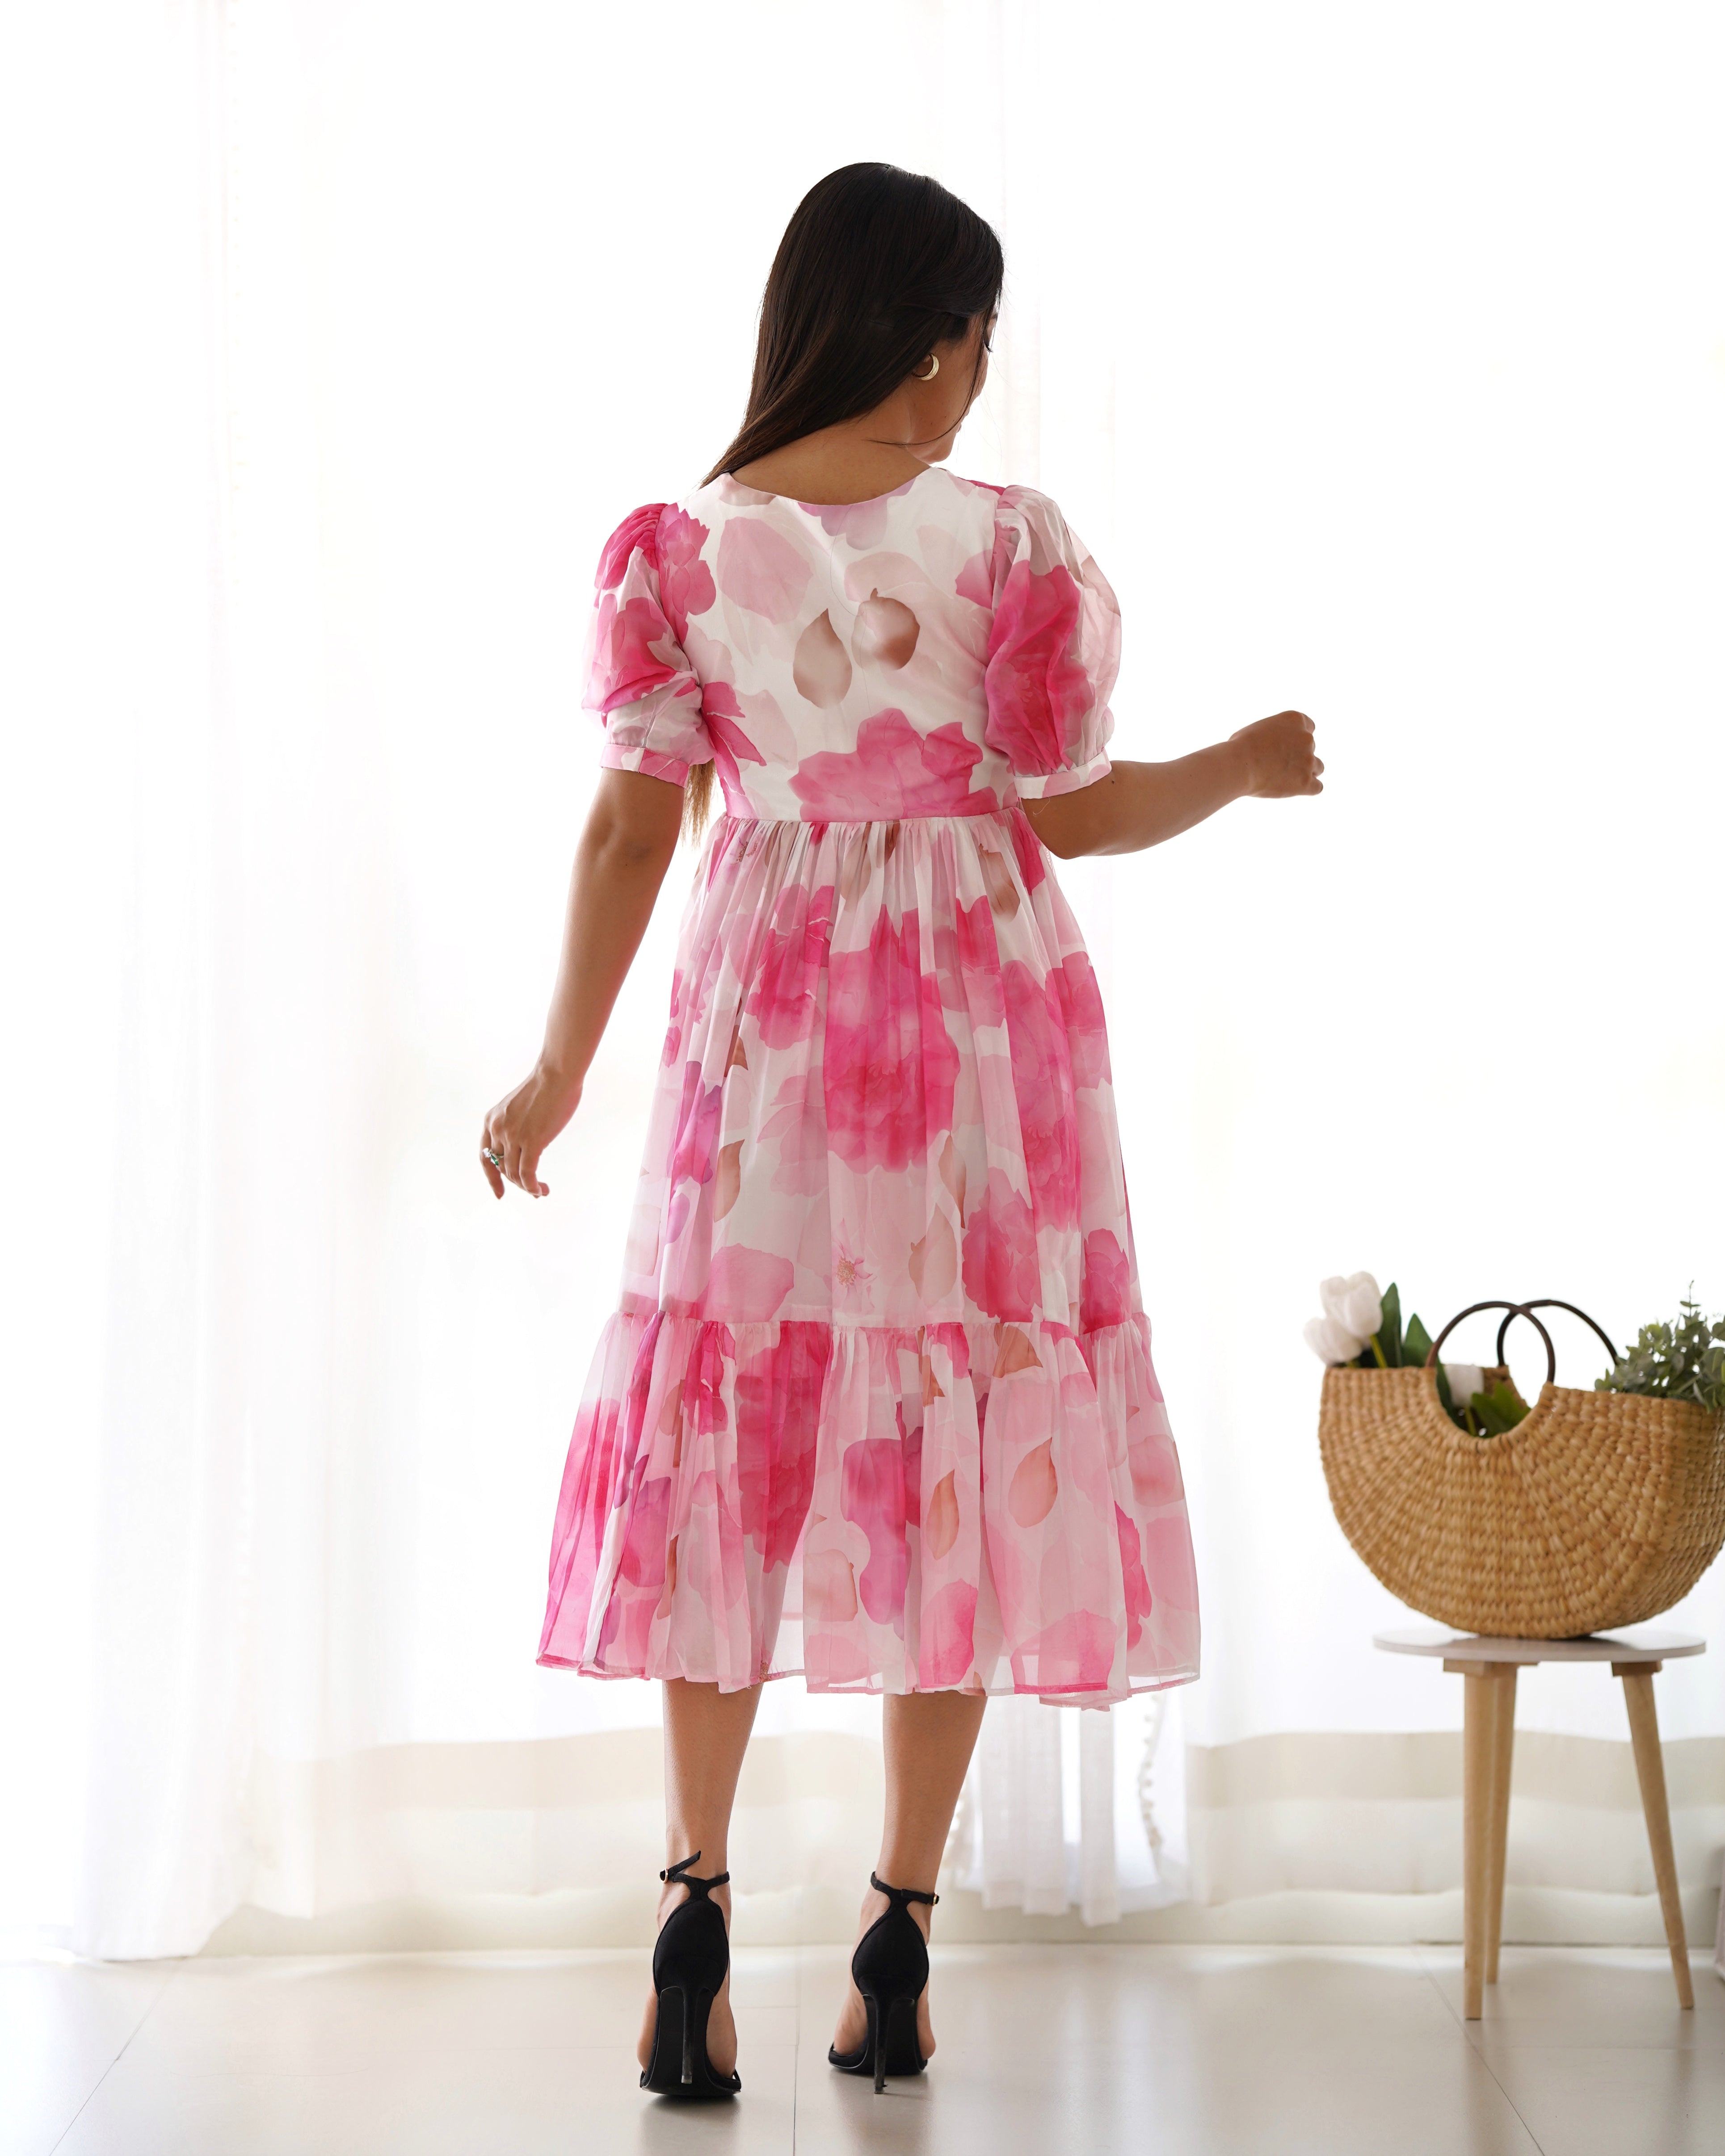 Pink Pure Soft Organza Floral Print One Piece Dress With Huge Flair